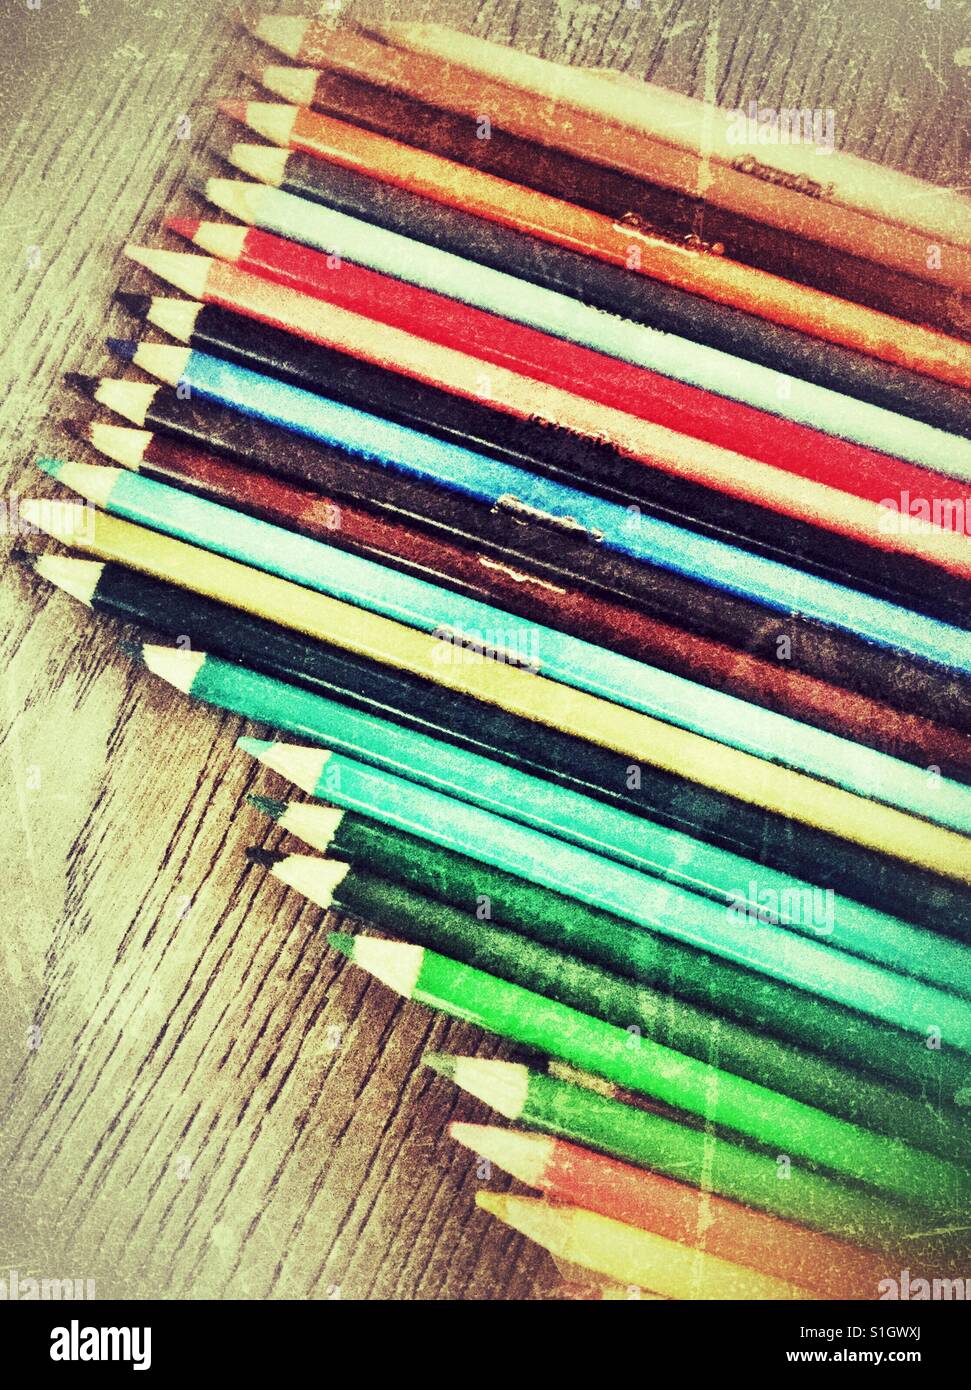 Pencil crayons in a row. Stock Photo